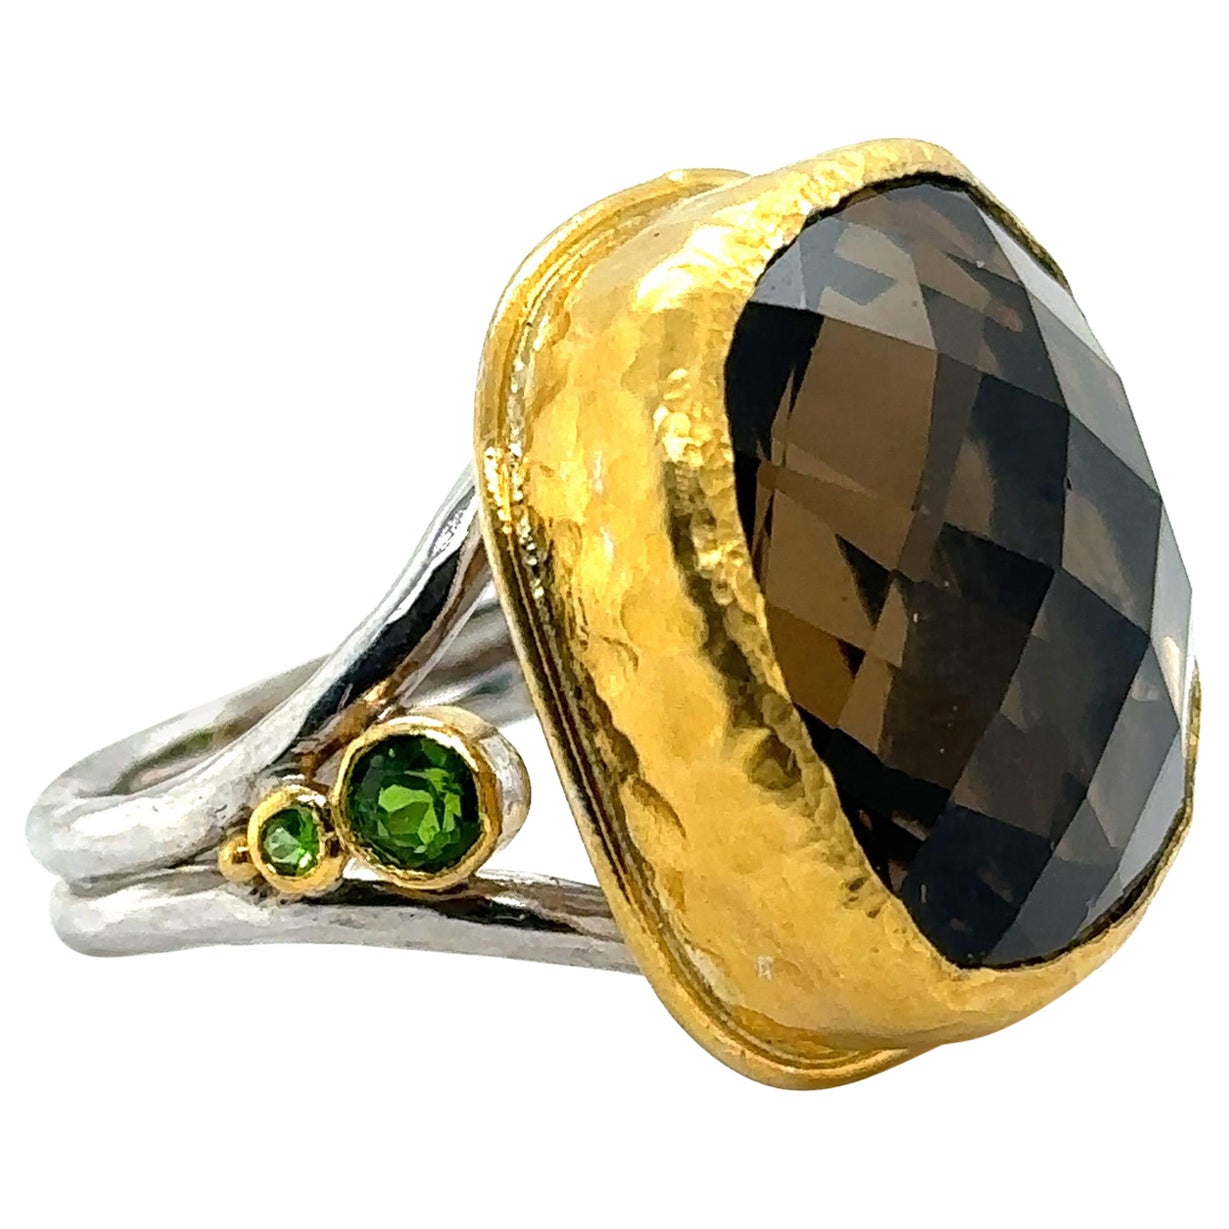 JAS-19-1993-24KT GOLD/SS with CUSHION CUT SMOKY QUARTZ & CHROME DIOPSIDES For Sale